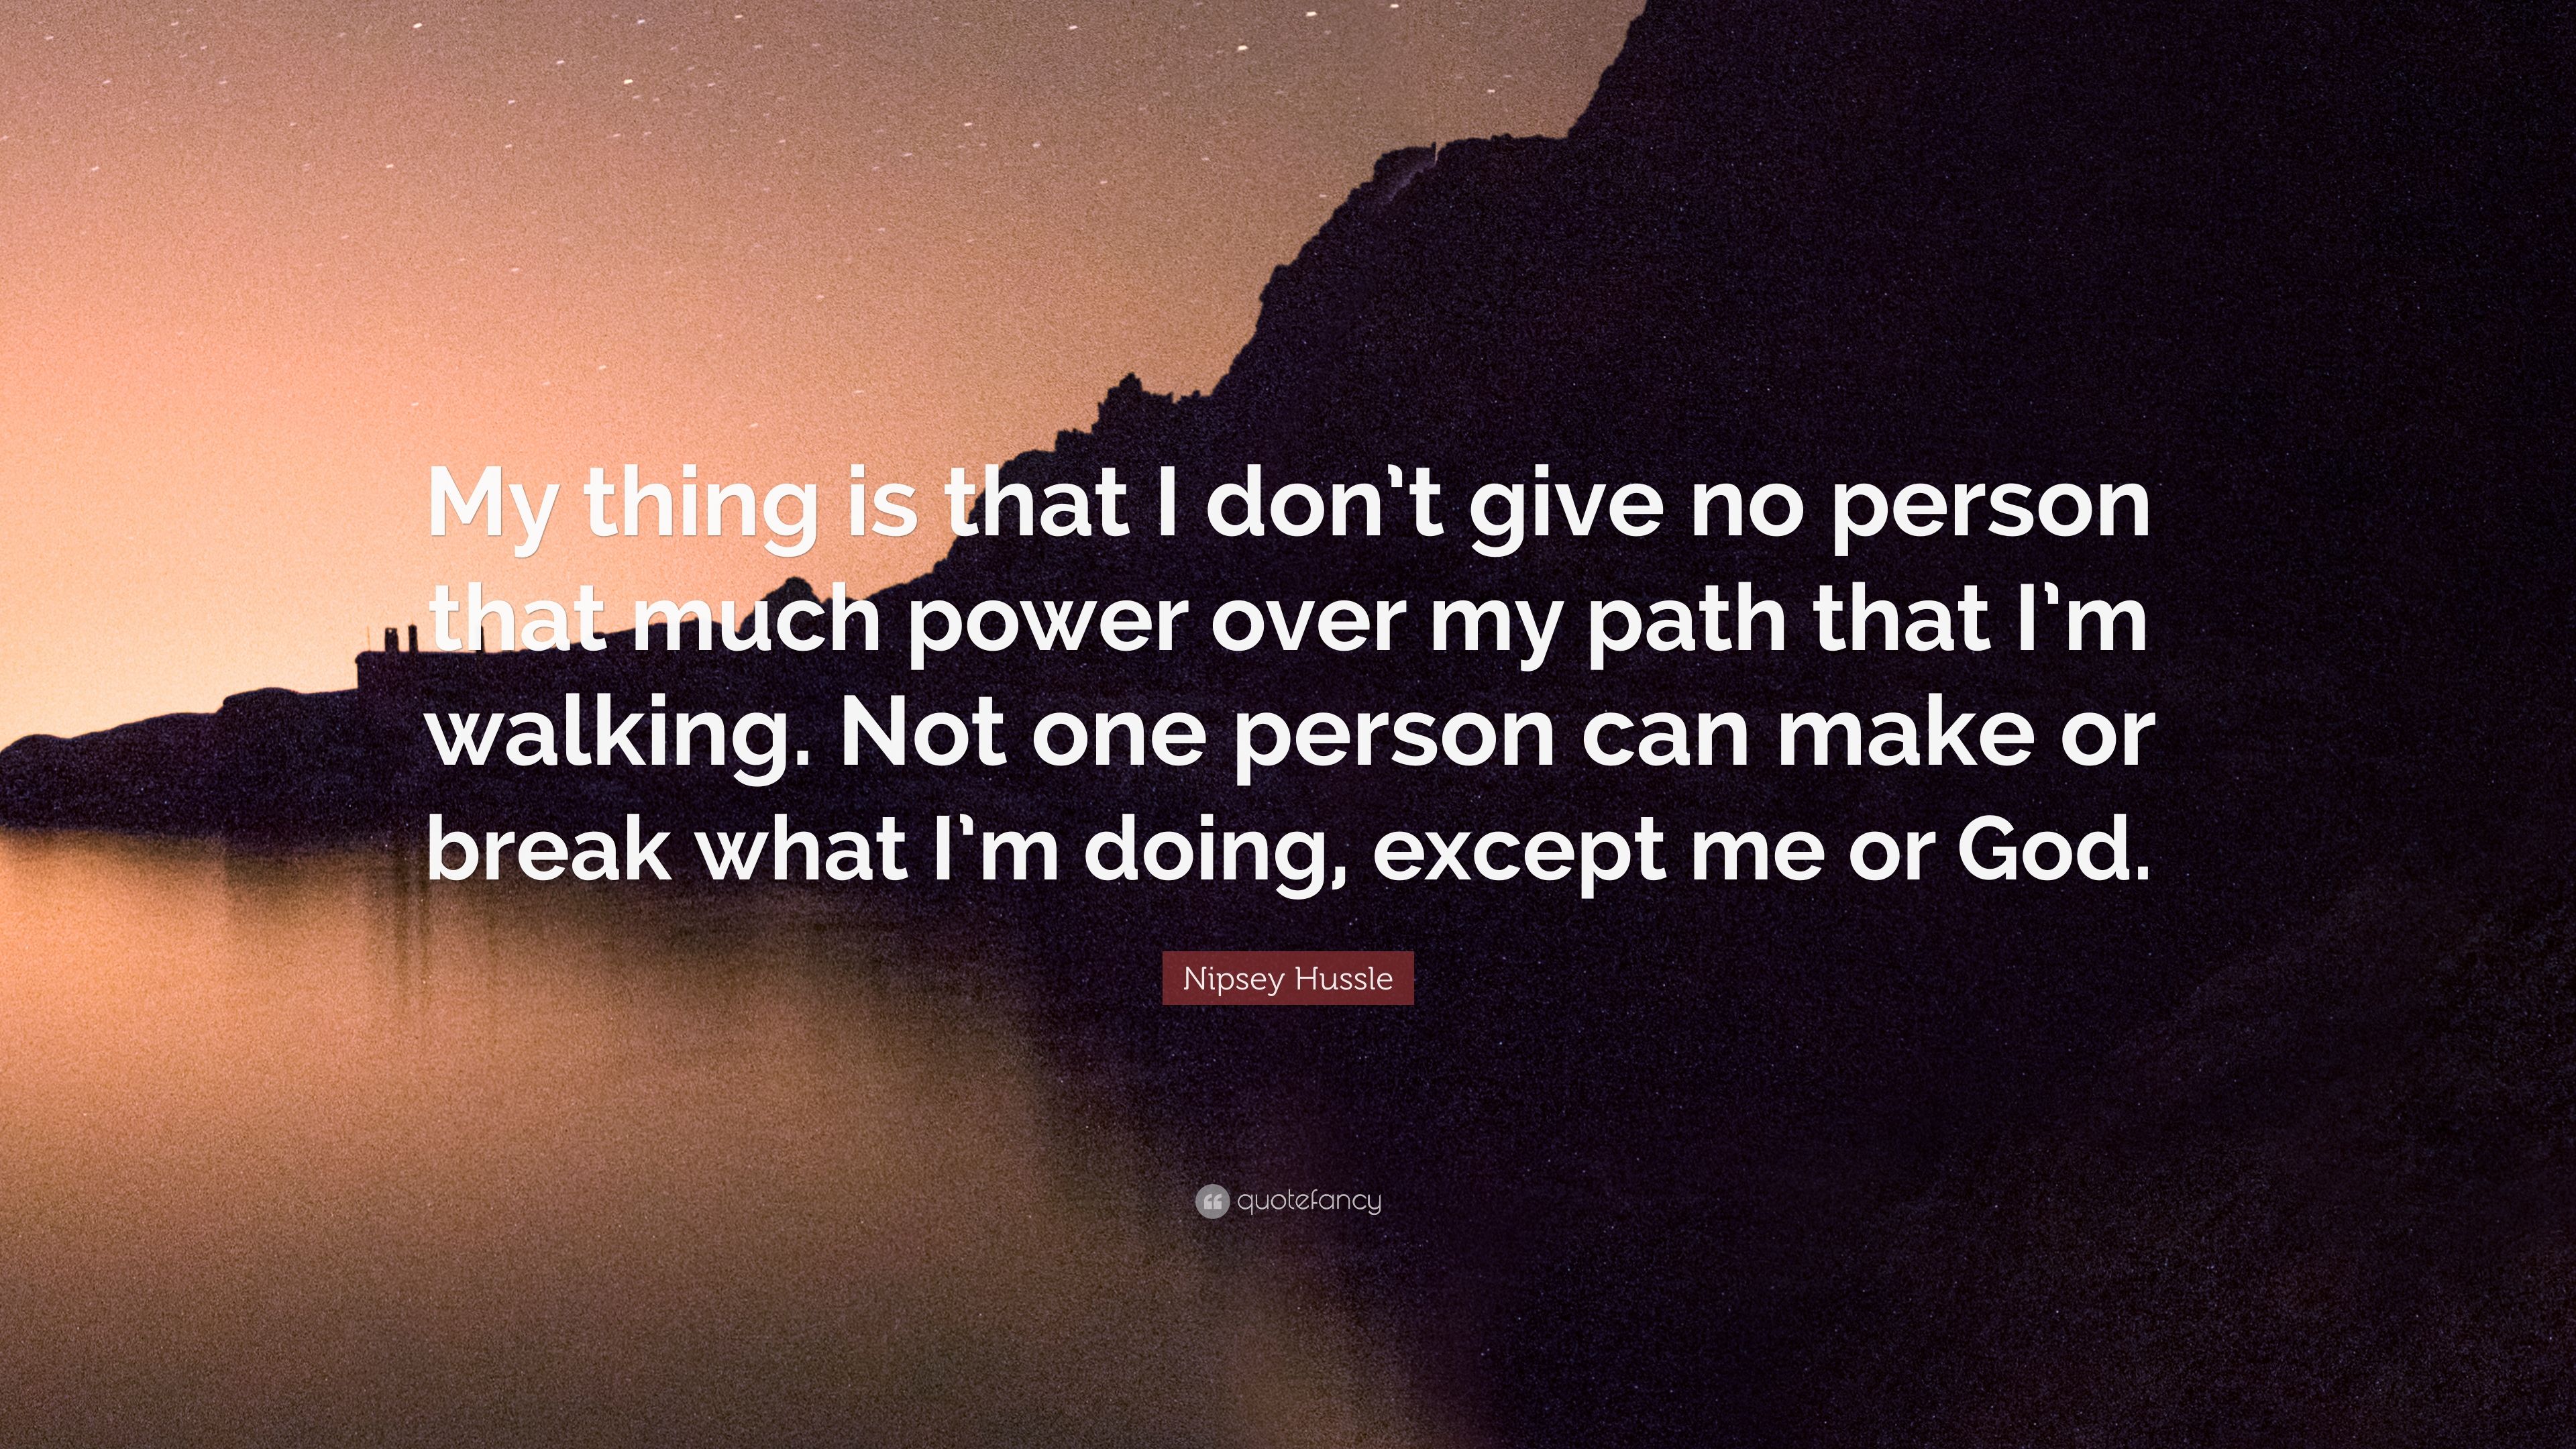 Nipsey Hussle Quote: "My thing is that I don't give no person tha...